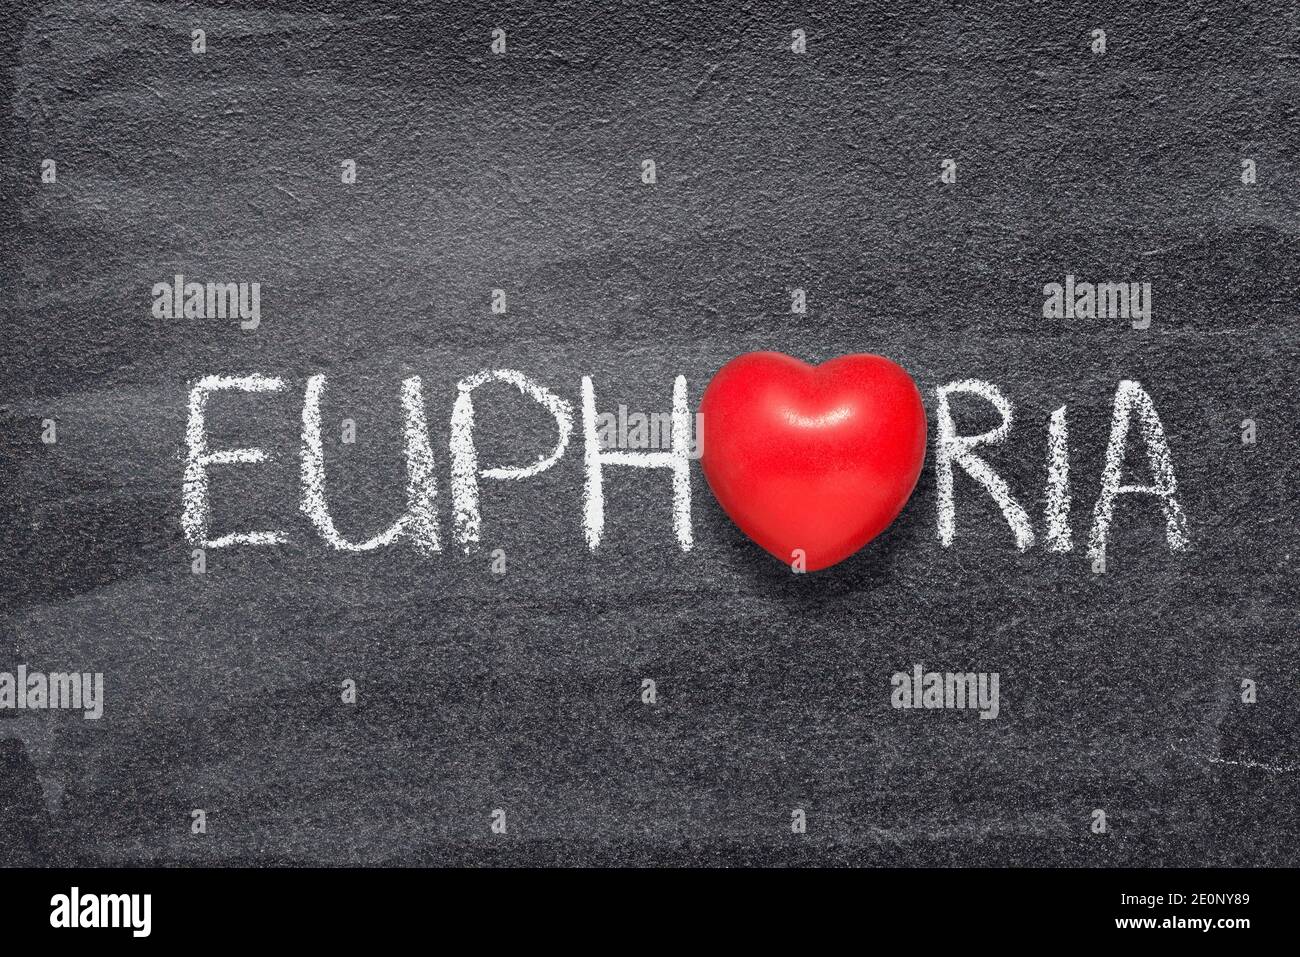 euphoria word written on chalkboard with red heart symbol Stock Photo